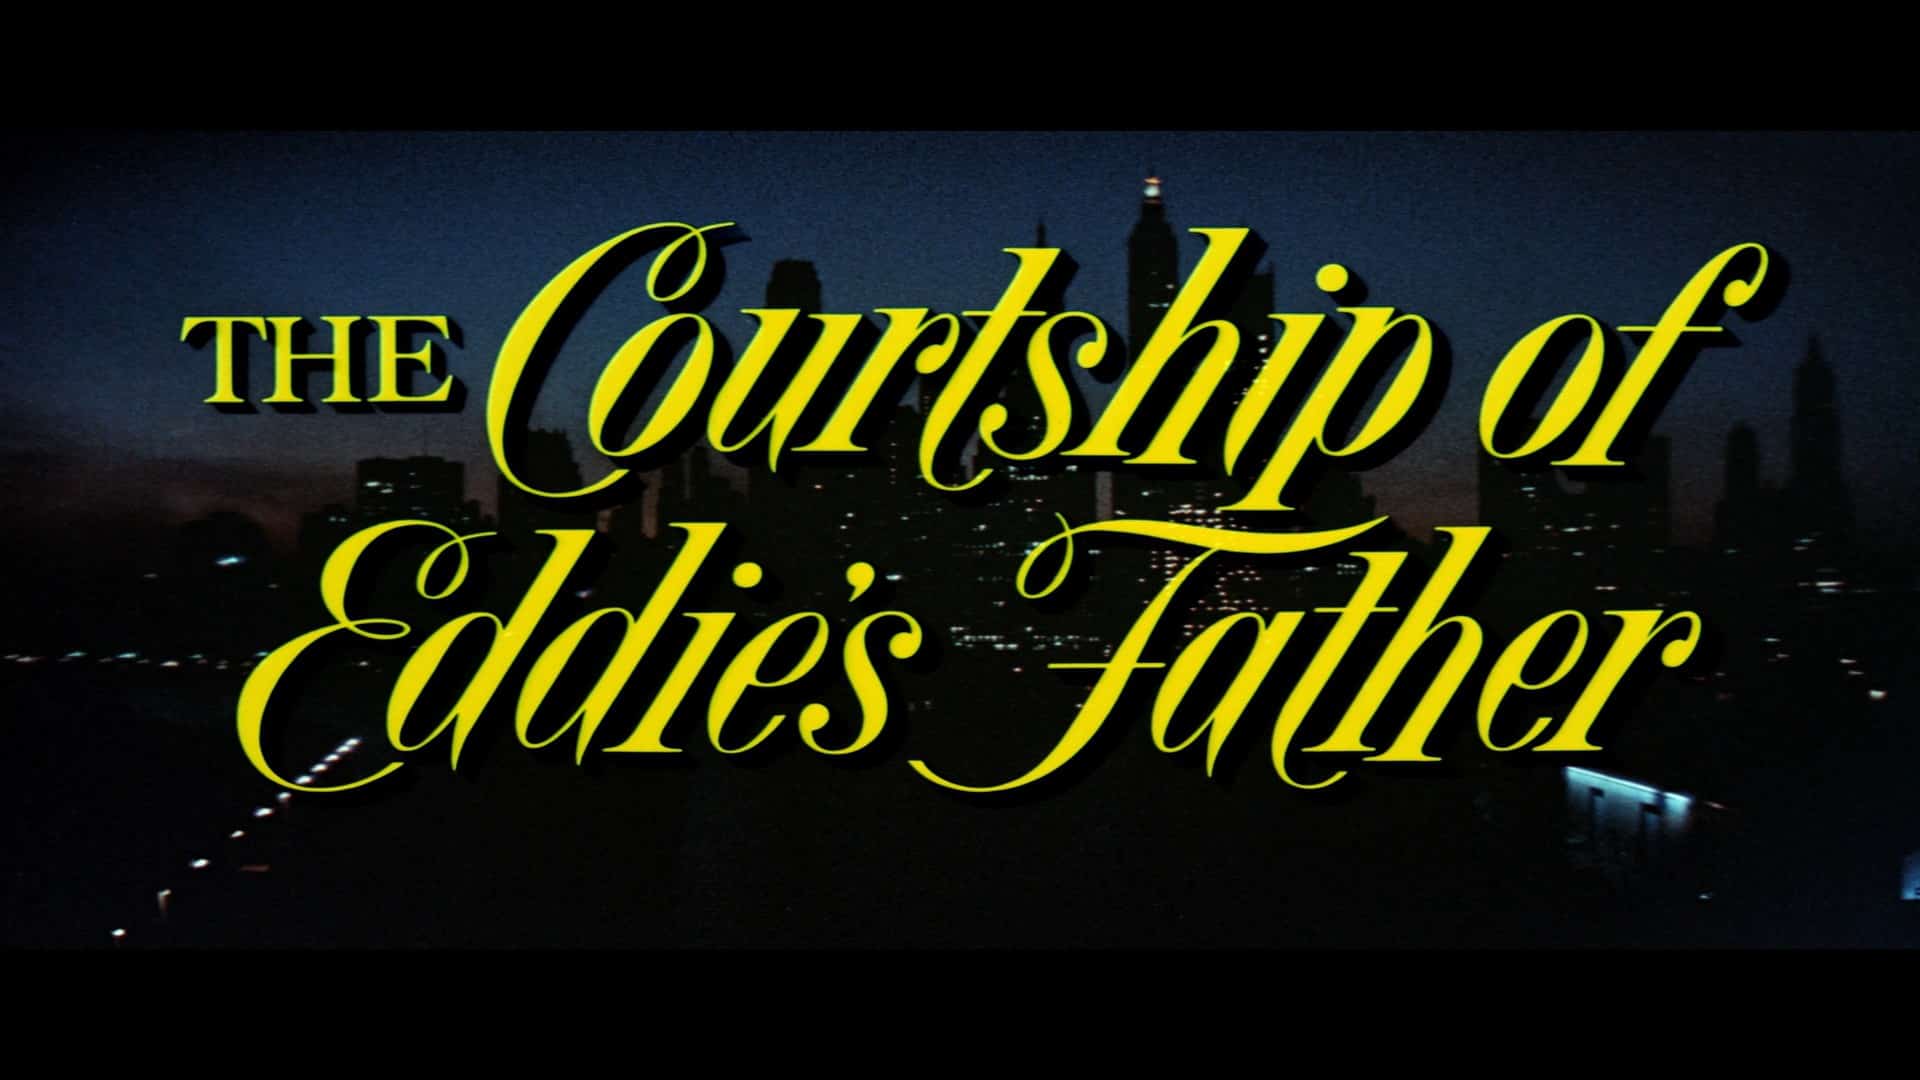 The Courtship of Eddie's Father (1962) [Warner Archive Blu-ray review] 17